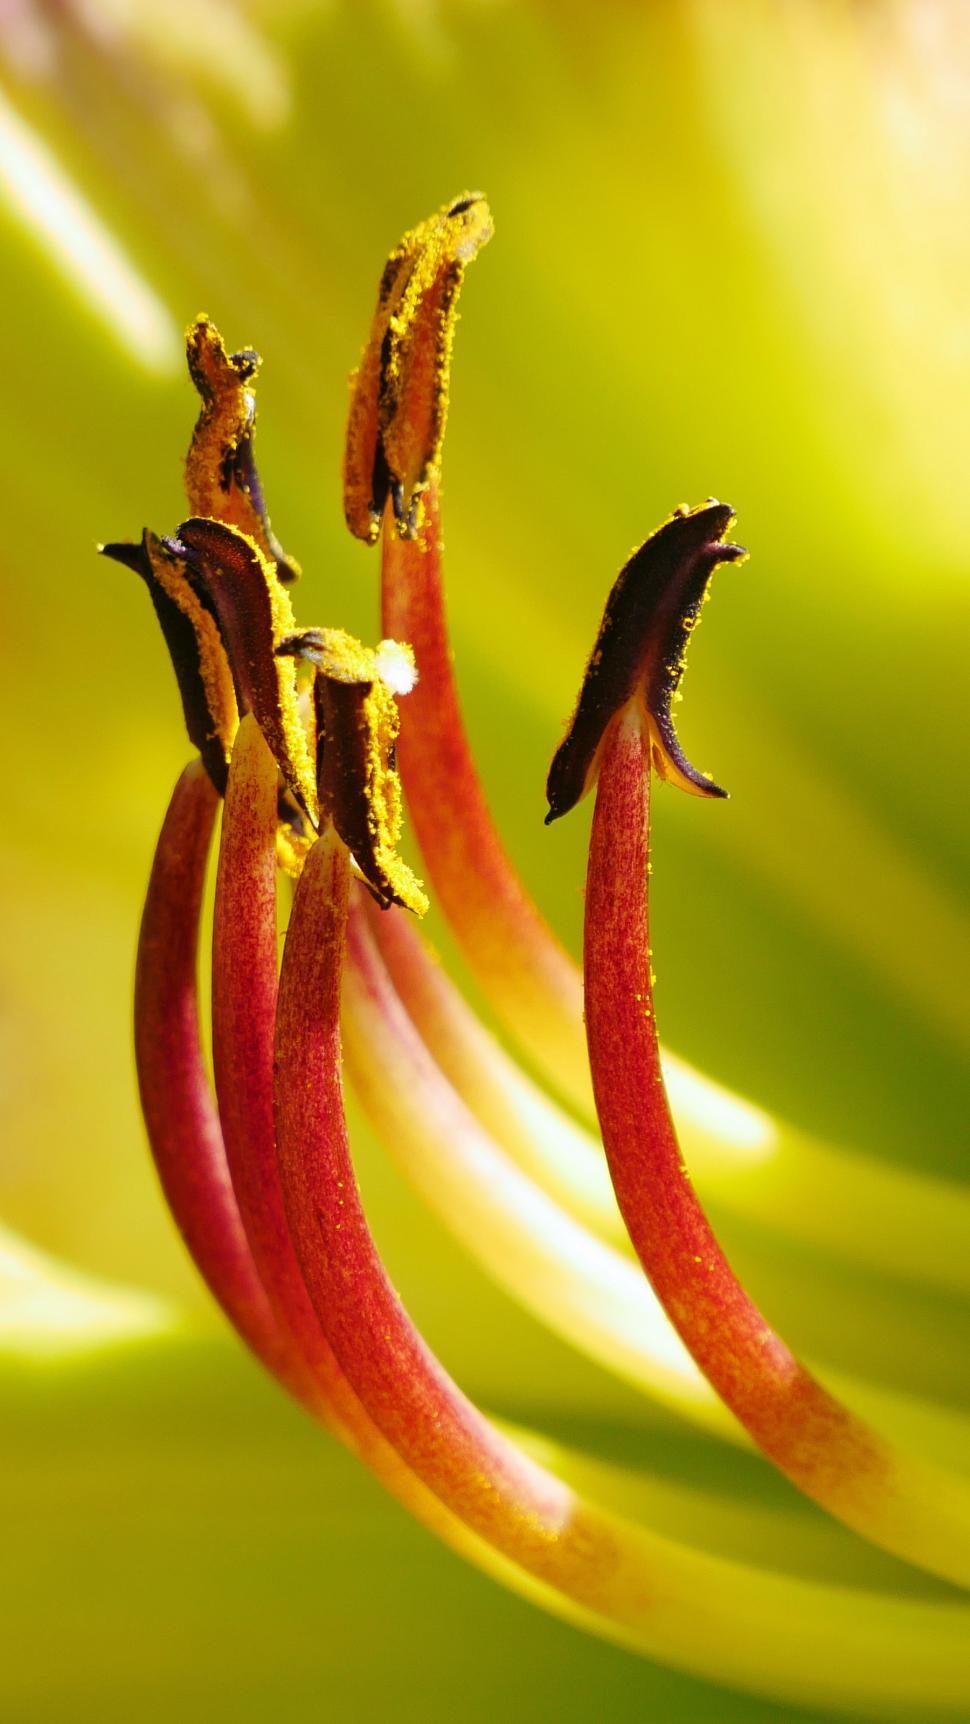 Free Image of Day Lily Flower Macro 